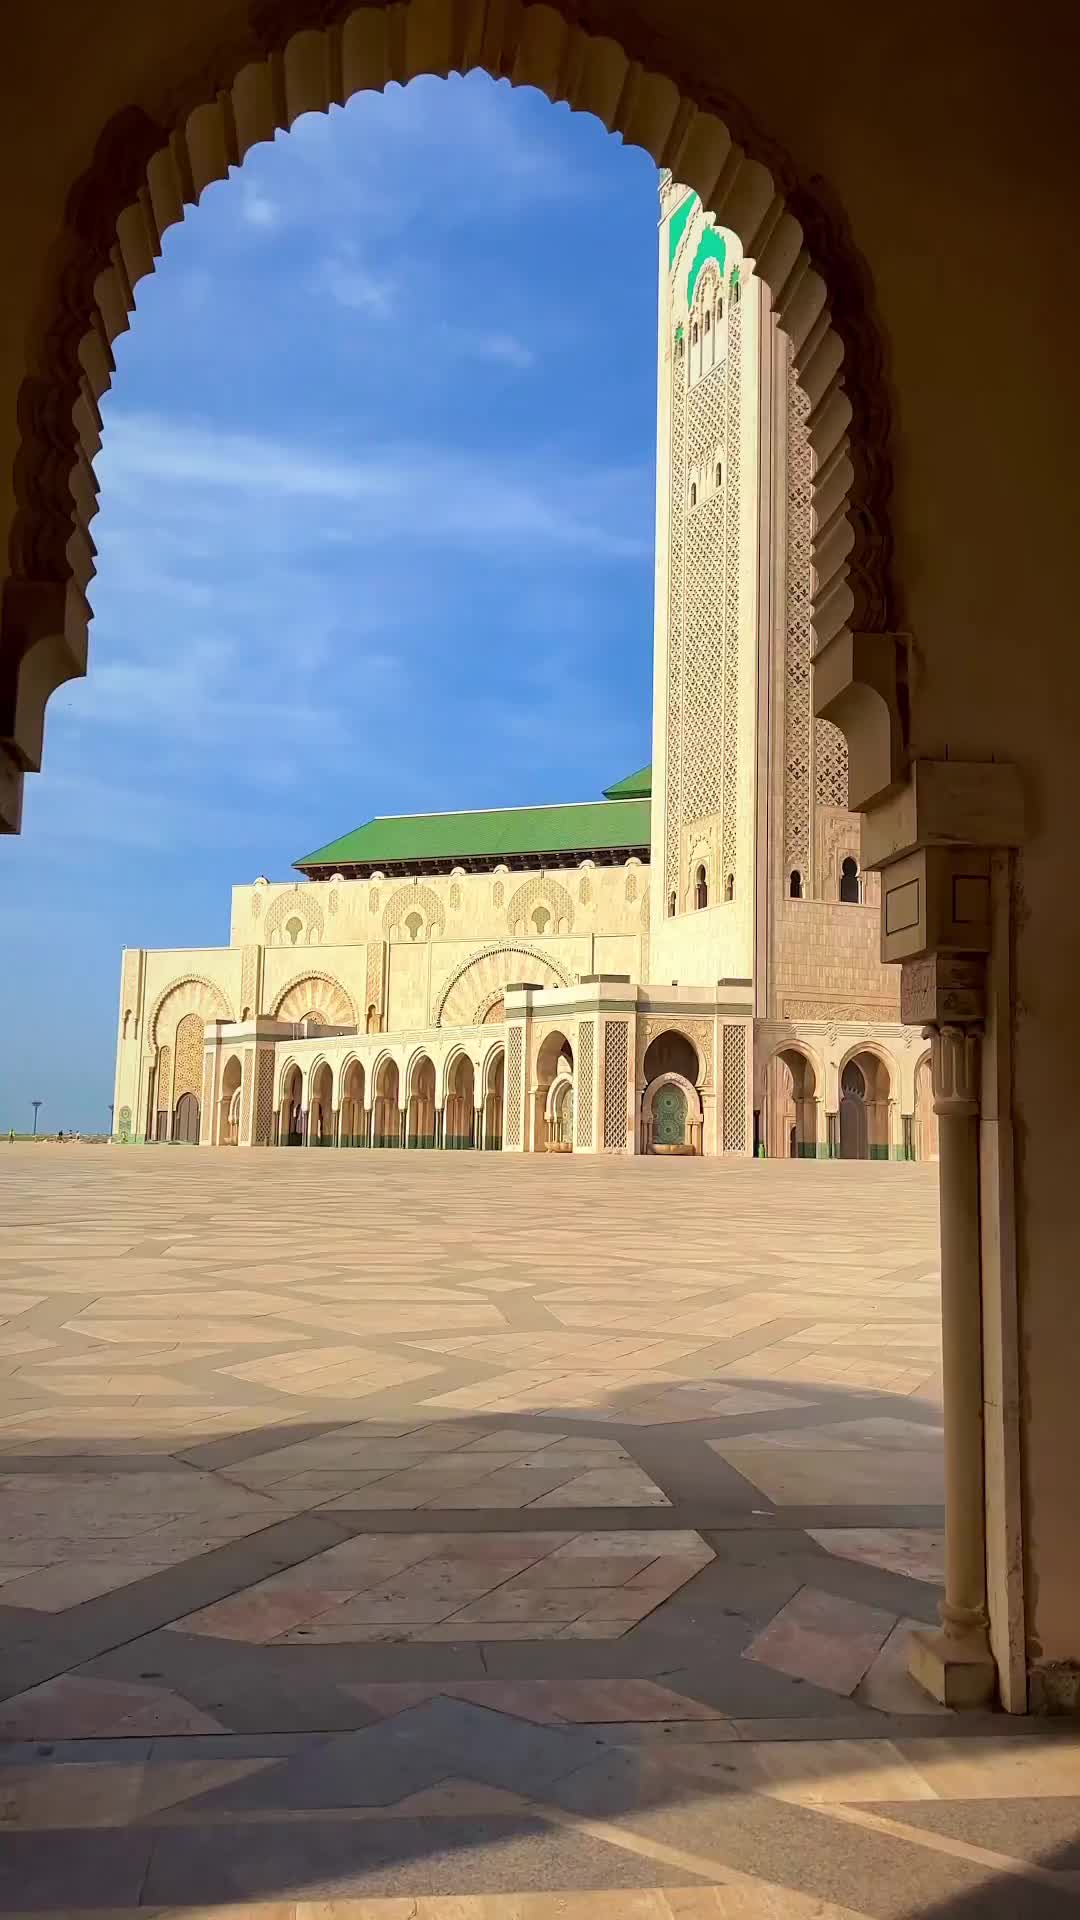 Did you know that Hassan II mosque is the 7th largest mosque in the world and that its minaret is also the second tallest minaret in the world? 😮

I didn’t know but I can tell that I was really impressed when I was in front of it.

🎥 @travelwithadrien

#hassan2 #hassanii #hassaniimosque #hassan2mosque #casablanca #visitmorocco #visitcasablanca #shotoniphone #mosquehassan2 #mosquesofworld #shotonmobile #mosquesoftheworld #mosques #mosquearchitecture #casablanca🇲🇦 #casablancamorocco #simplymorocco #morocco #bluesky #cielbleu #mosquée #marruecos #marrocos #marokko #maroc